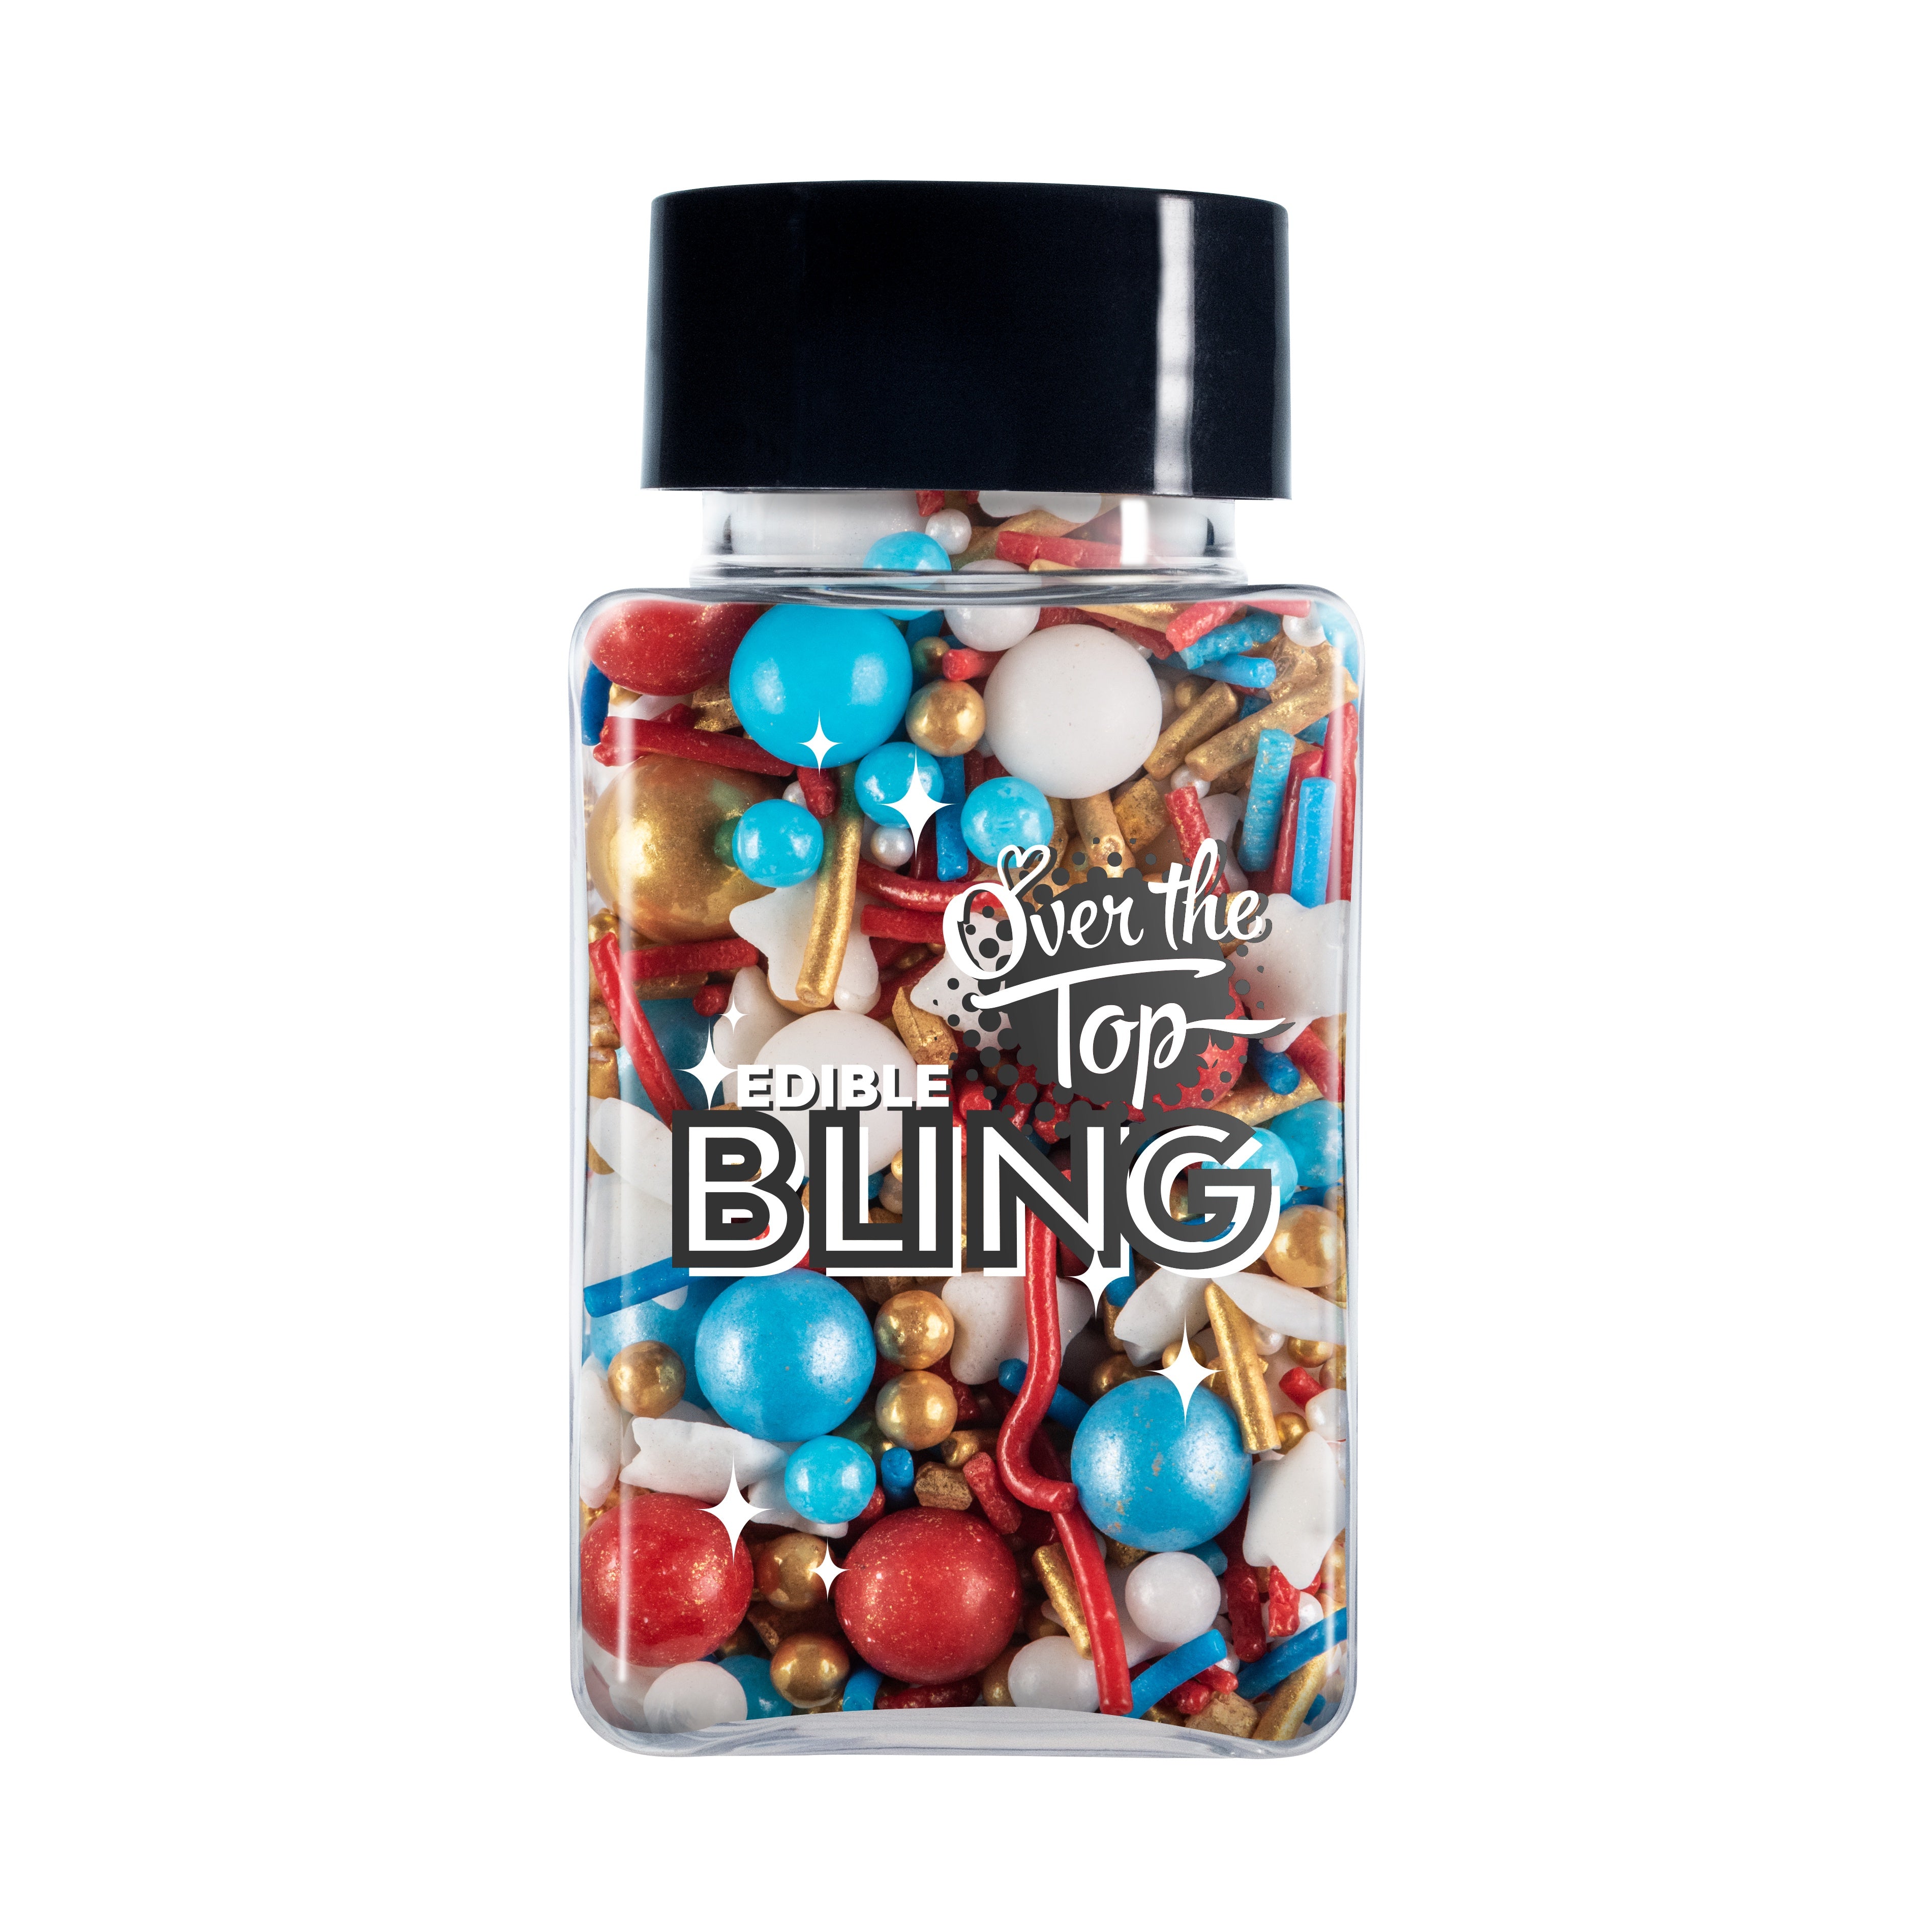 Over The Top Edible Bling Sprinkles - Circus Mix 60g